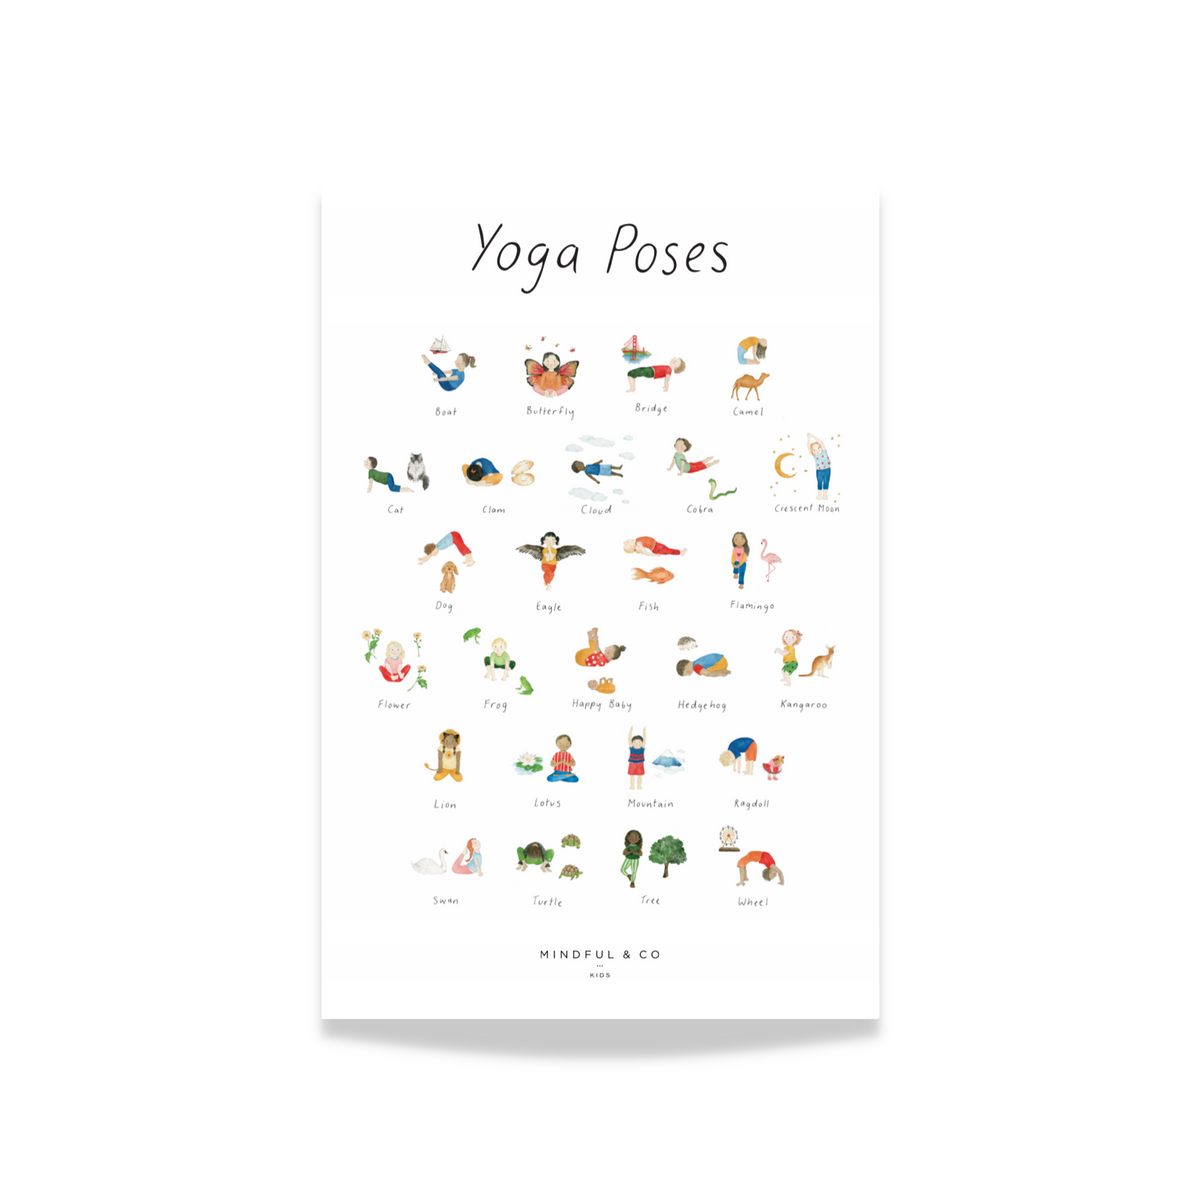 From The Heart Up.: Yoga for Kids + FREE Printables